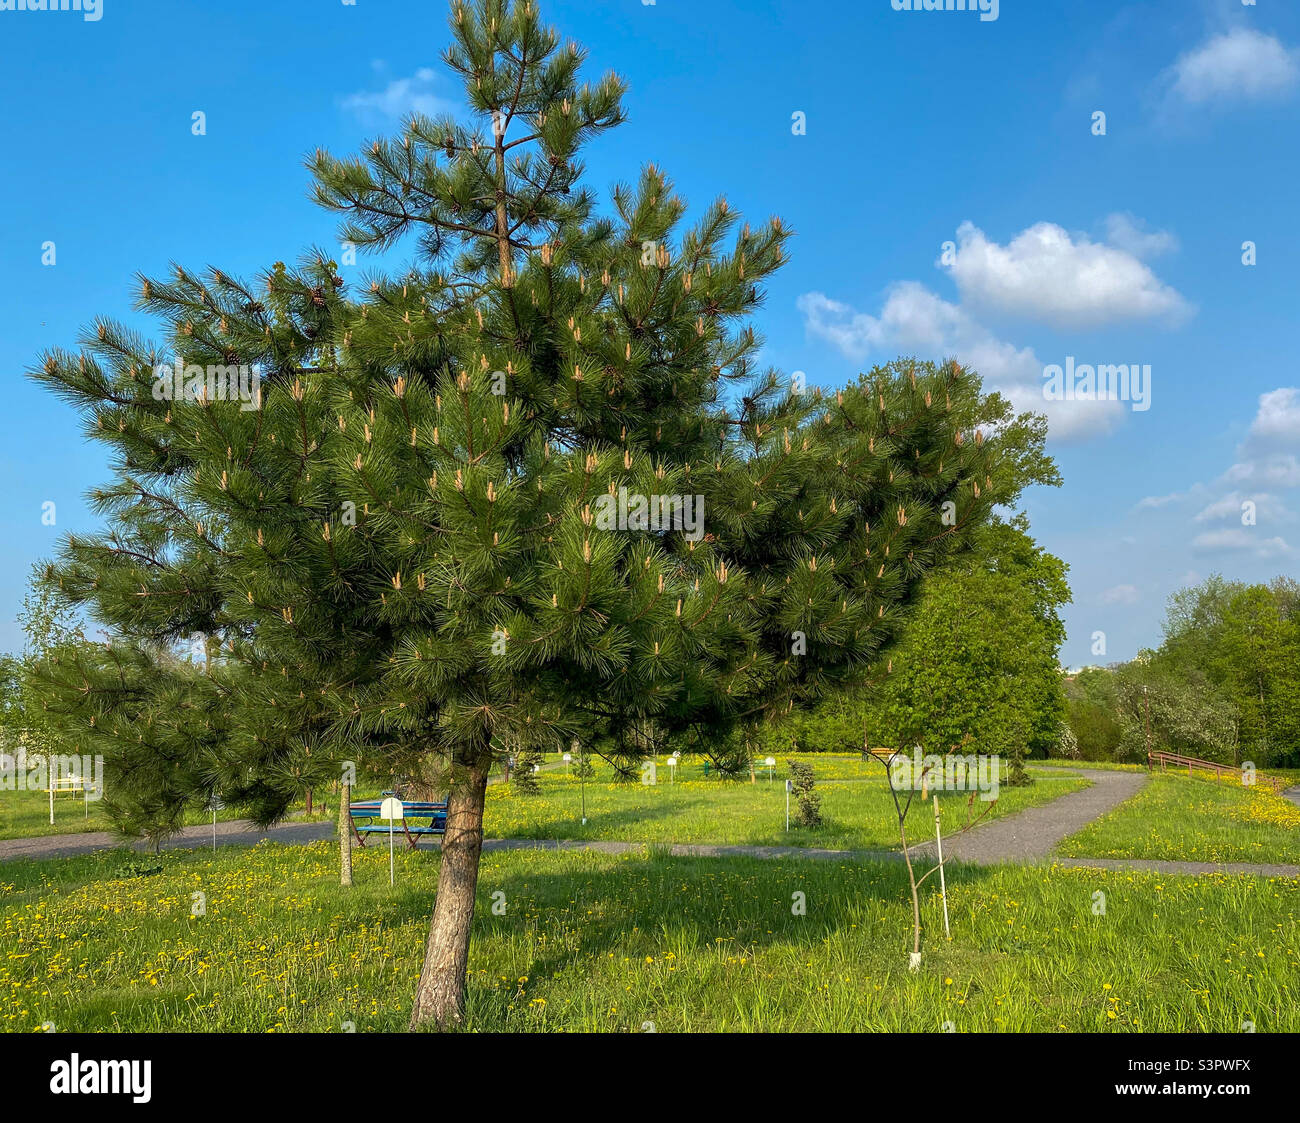 Young Aleppo pine pinus halepensis grows in the park Stock Photo